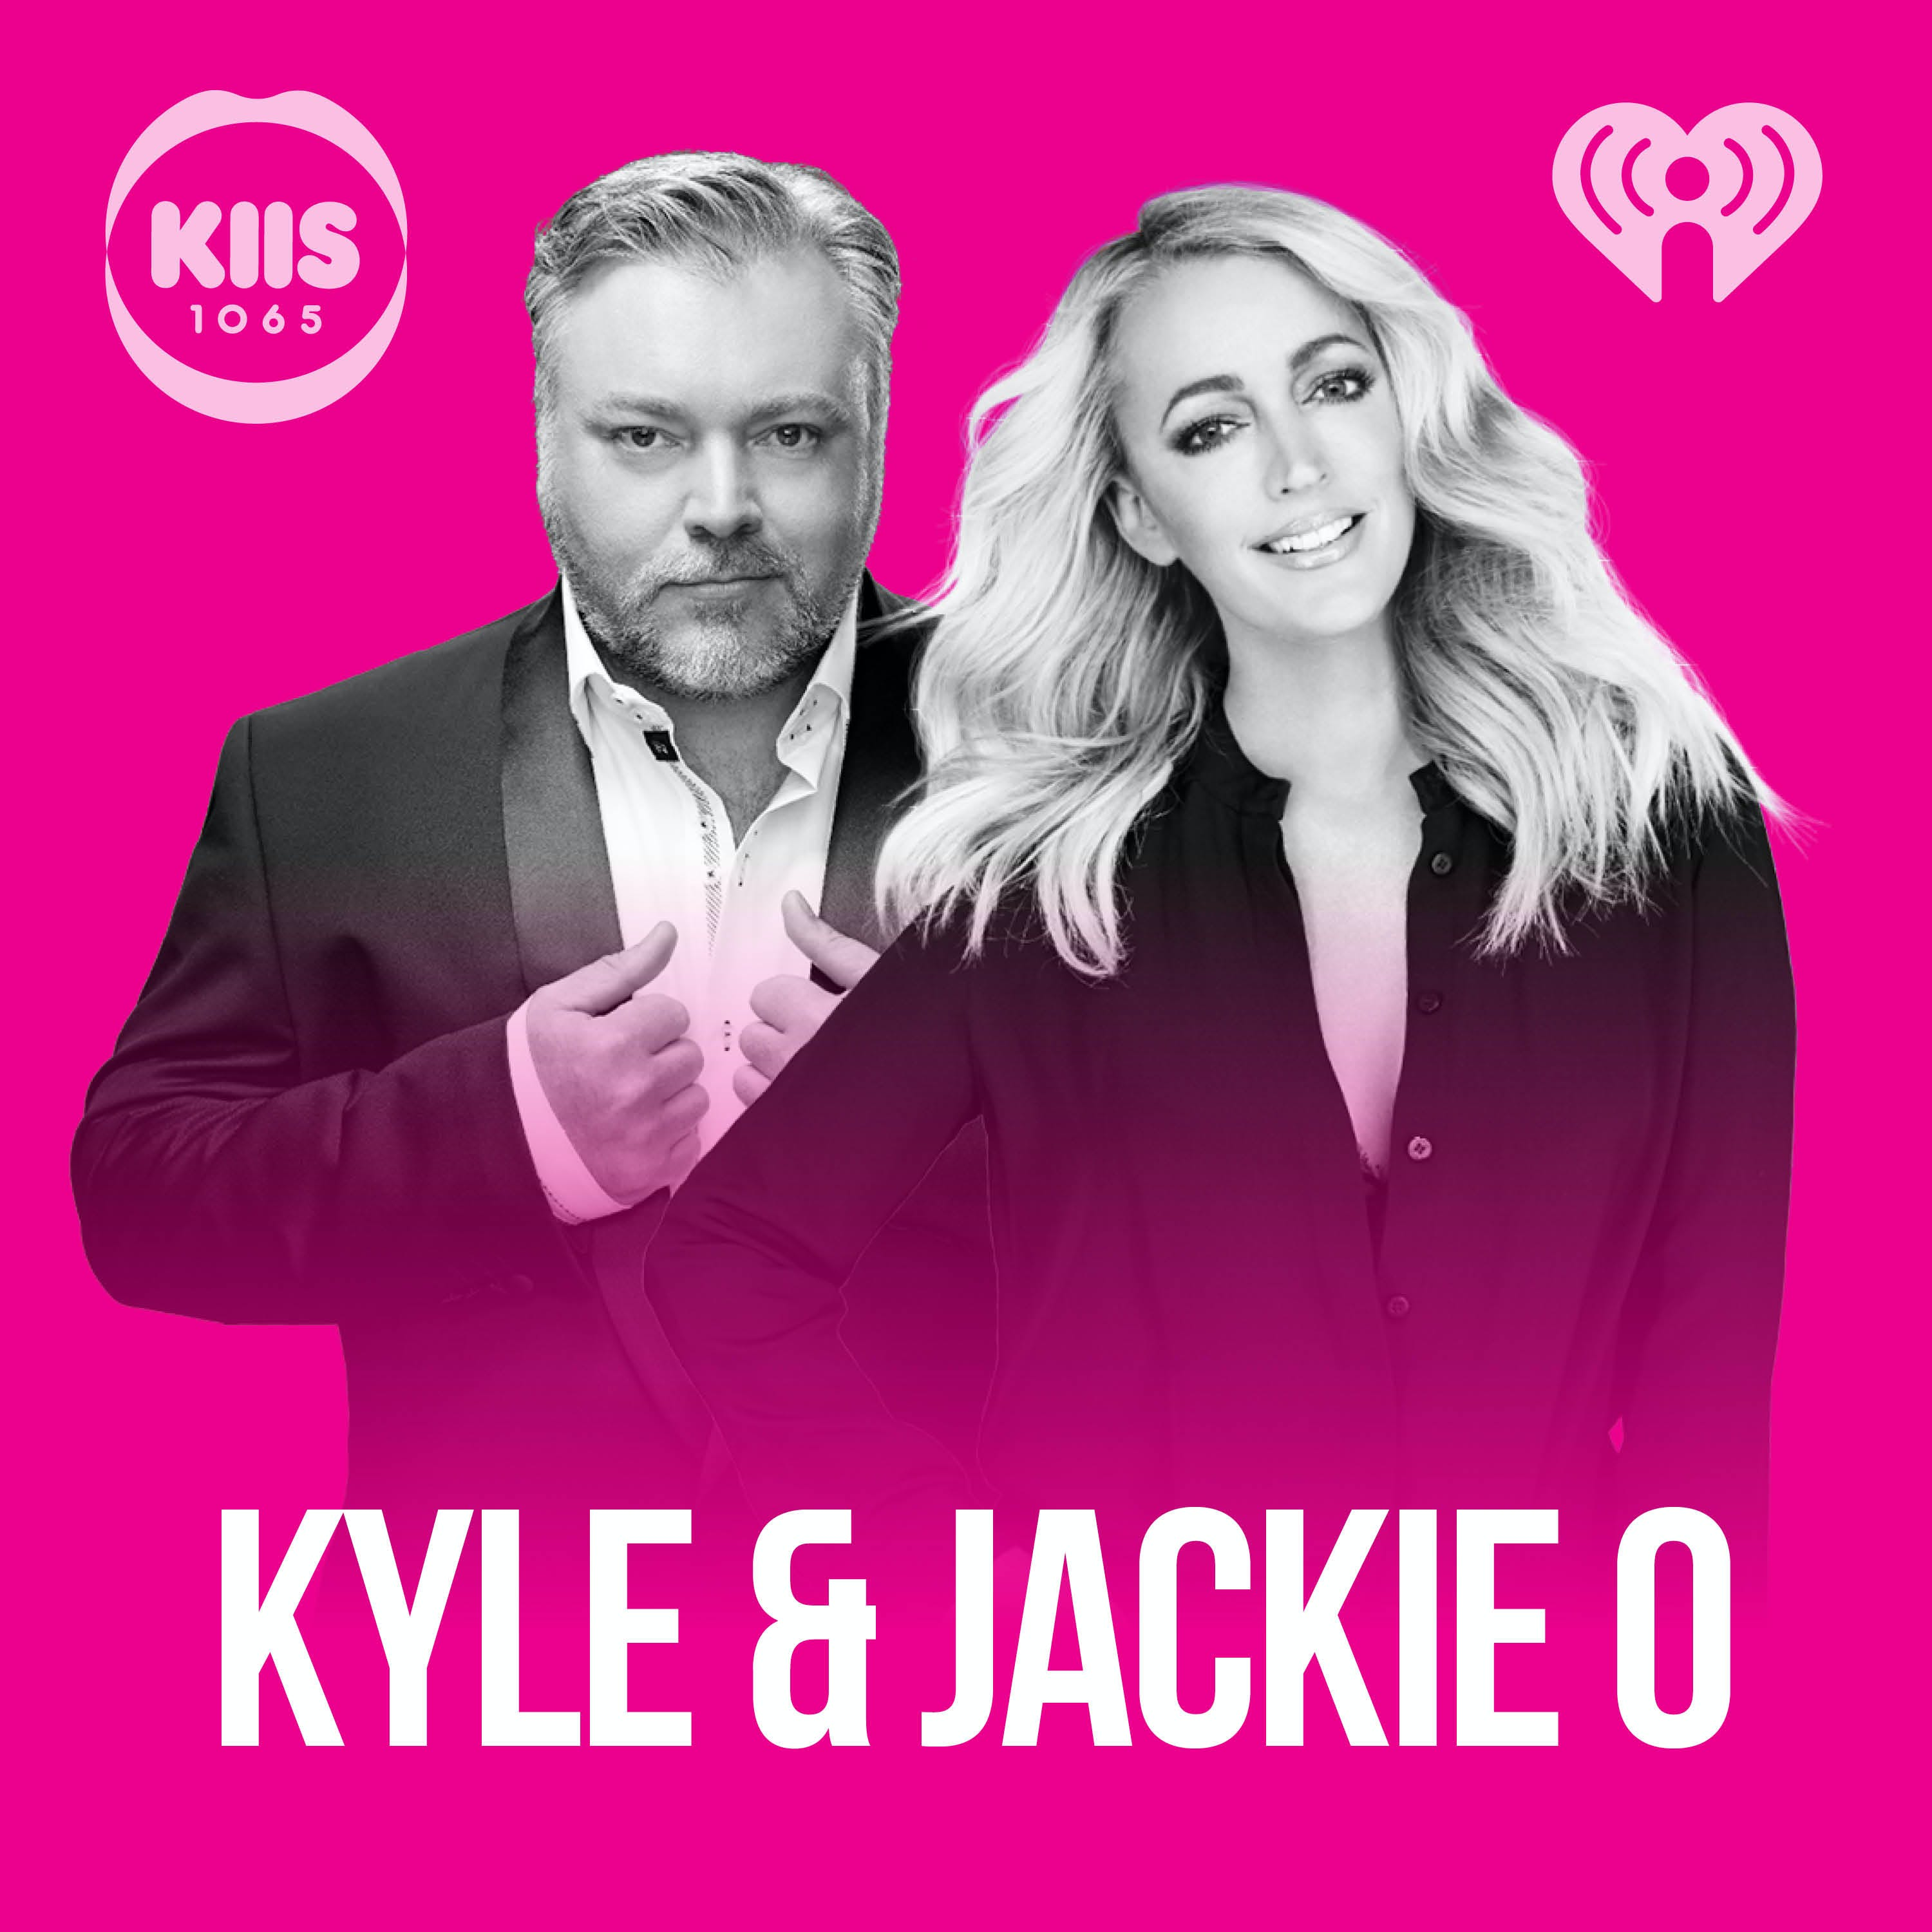 13/11/18 - The Kyle and Jackie O Best Of Show #981